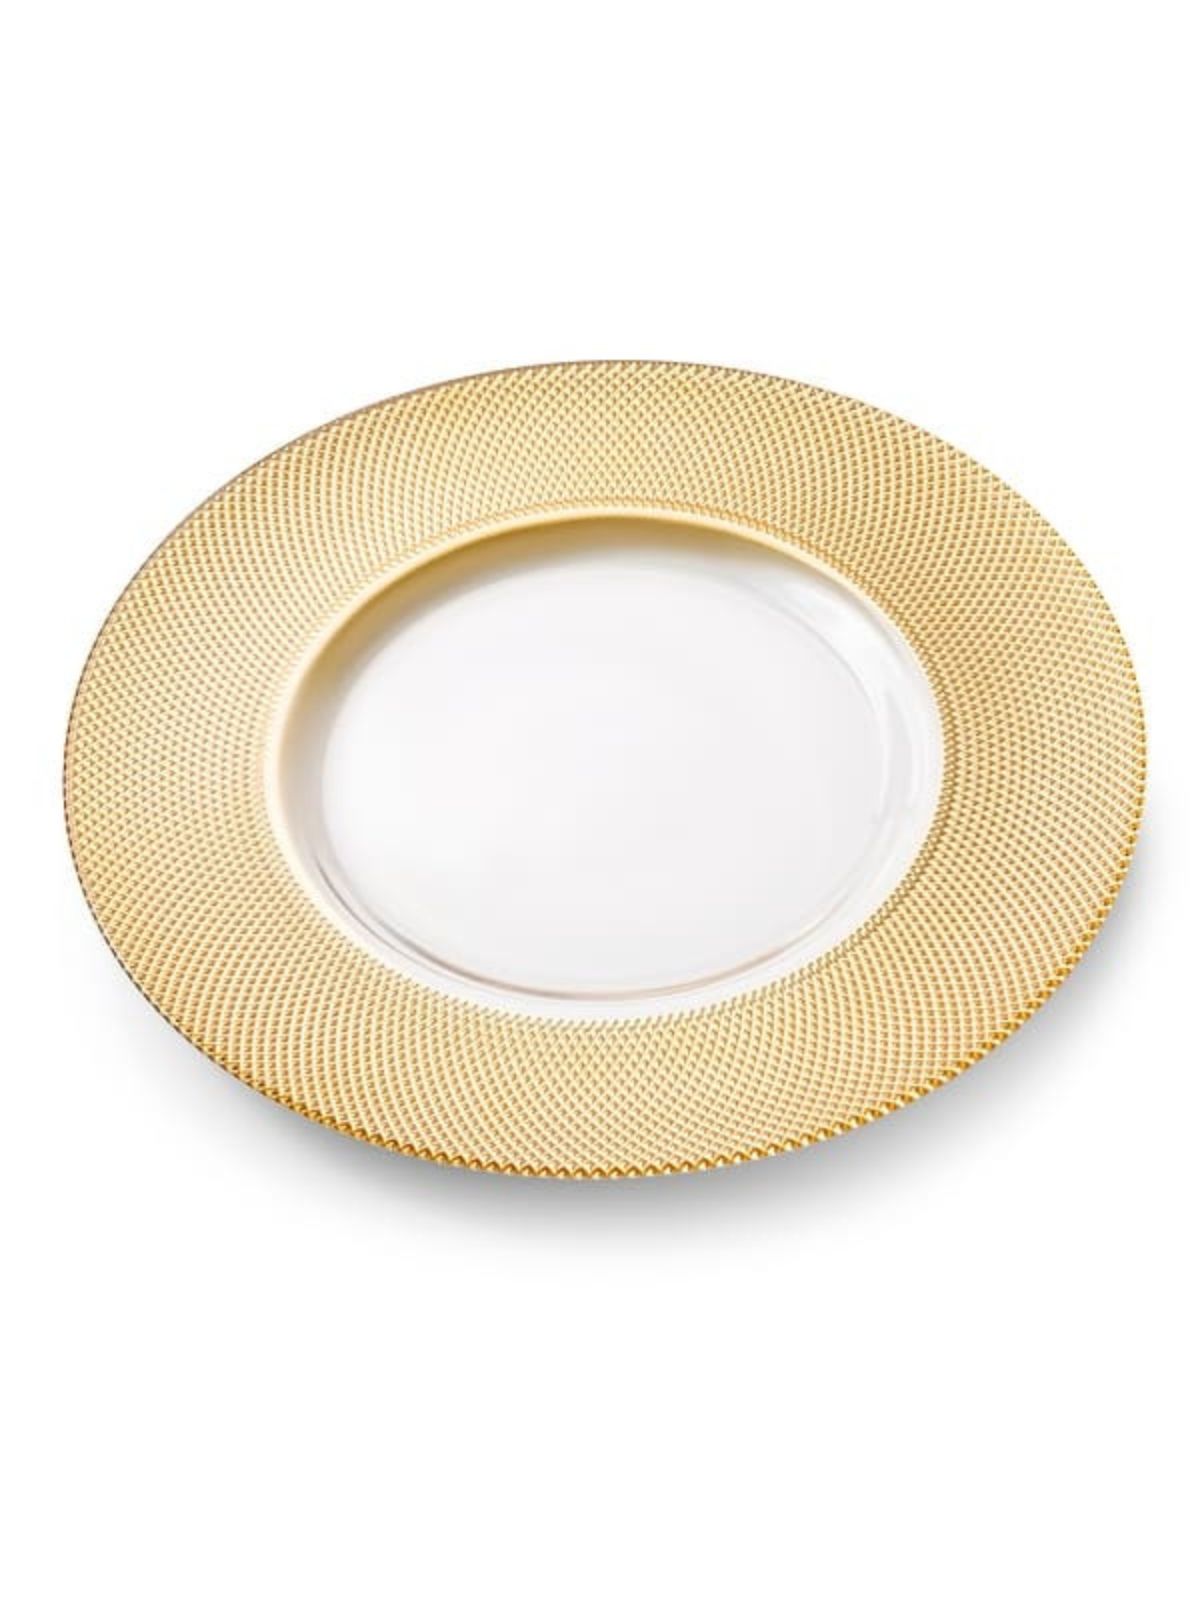 These 12D Glass Charger Plates are dotted with gold beads as a thick border to accentuate the white centered dish. Sold by KYA Home Decor